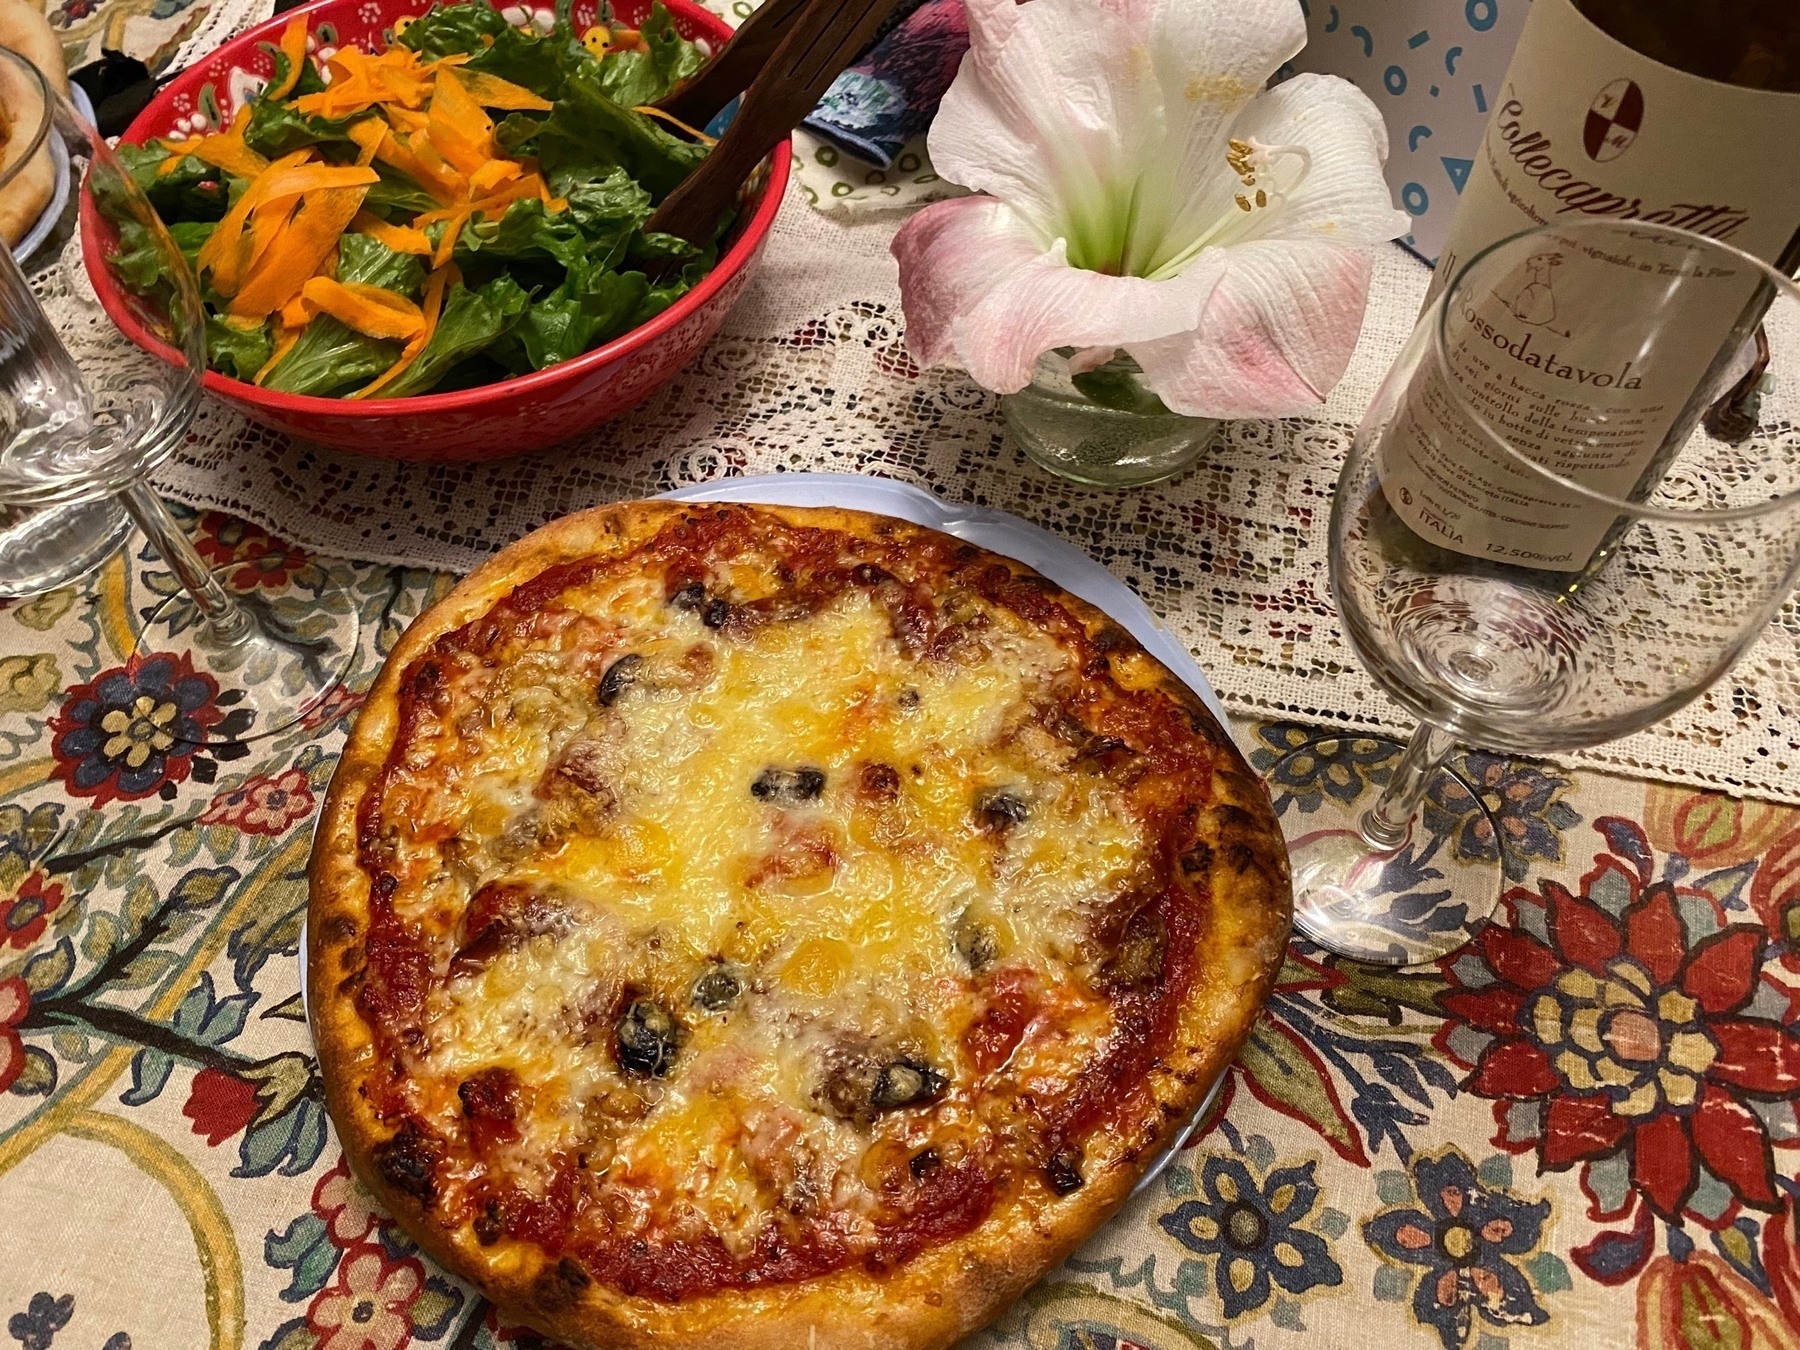 Small pizza on a table next to a salad and a wine glass.